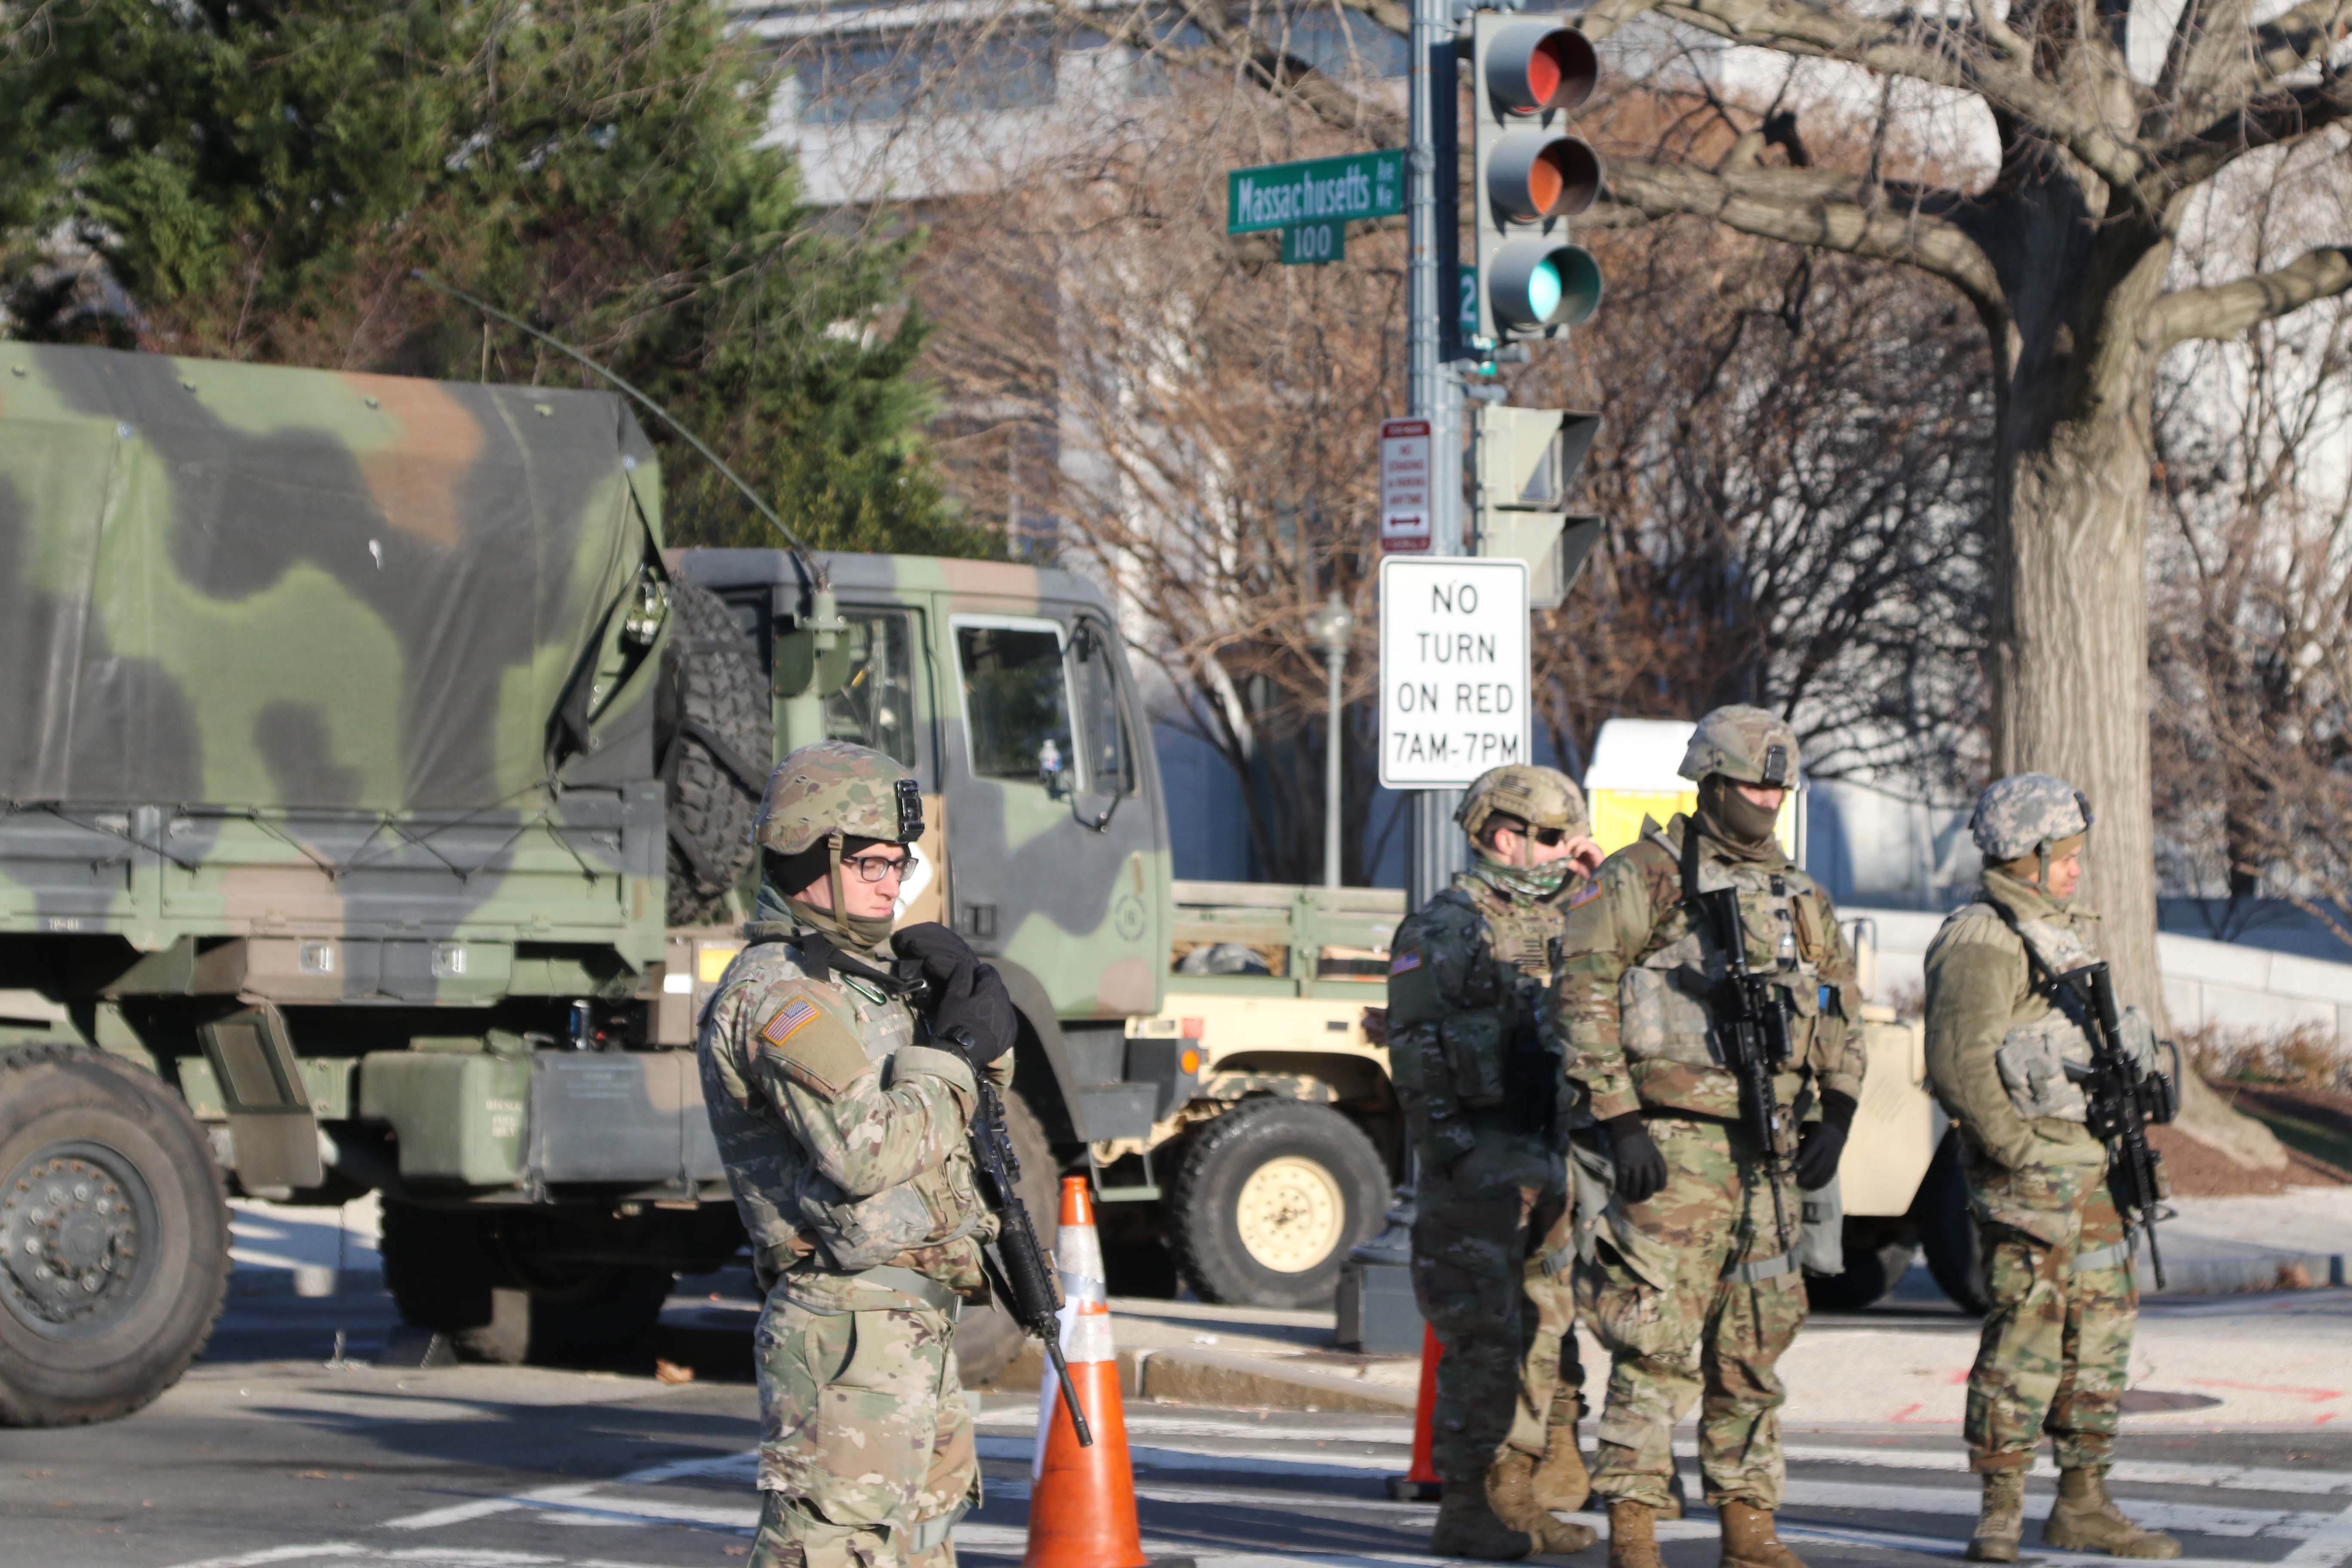 A military checkpoint in downtown Washington.